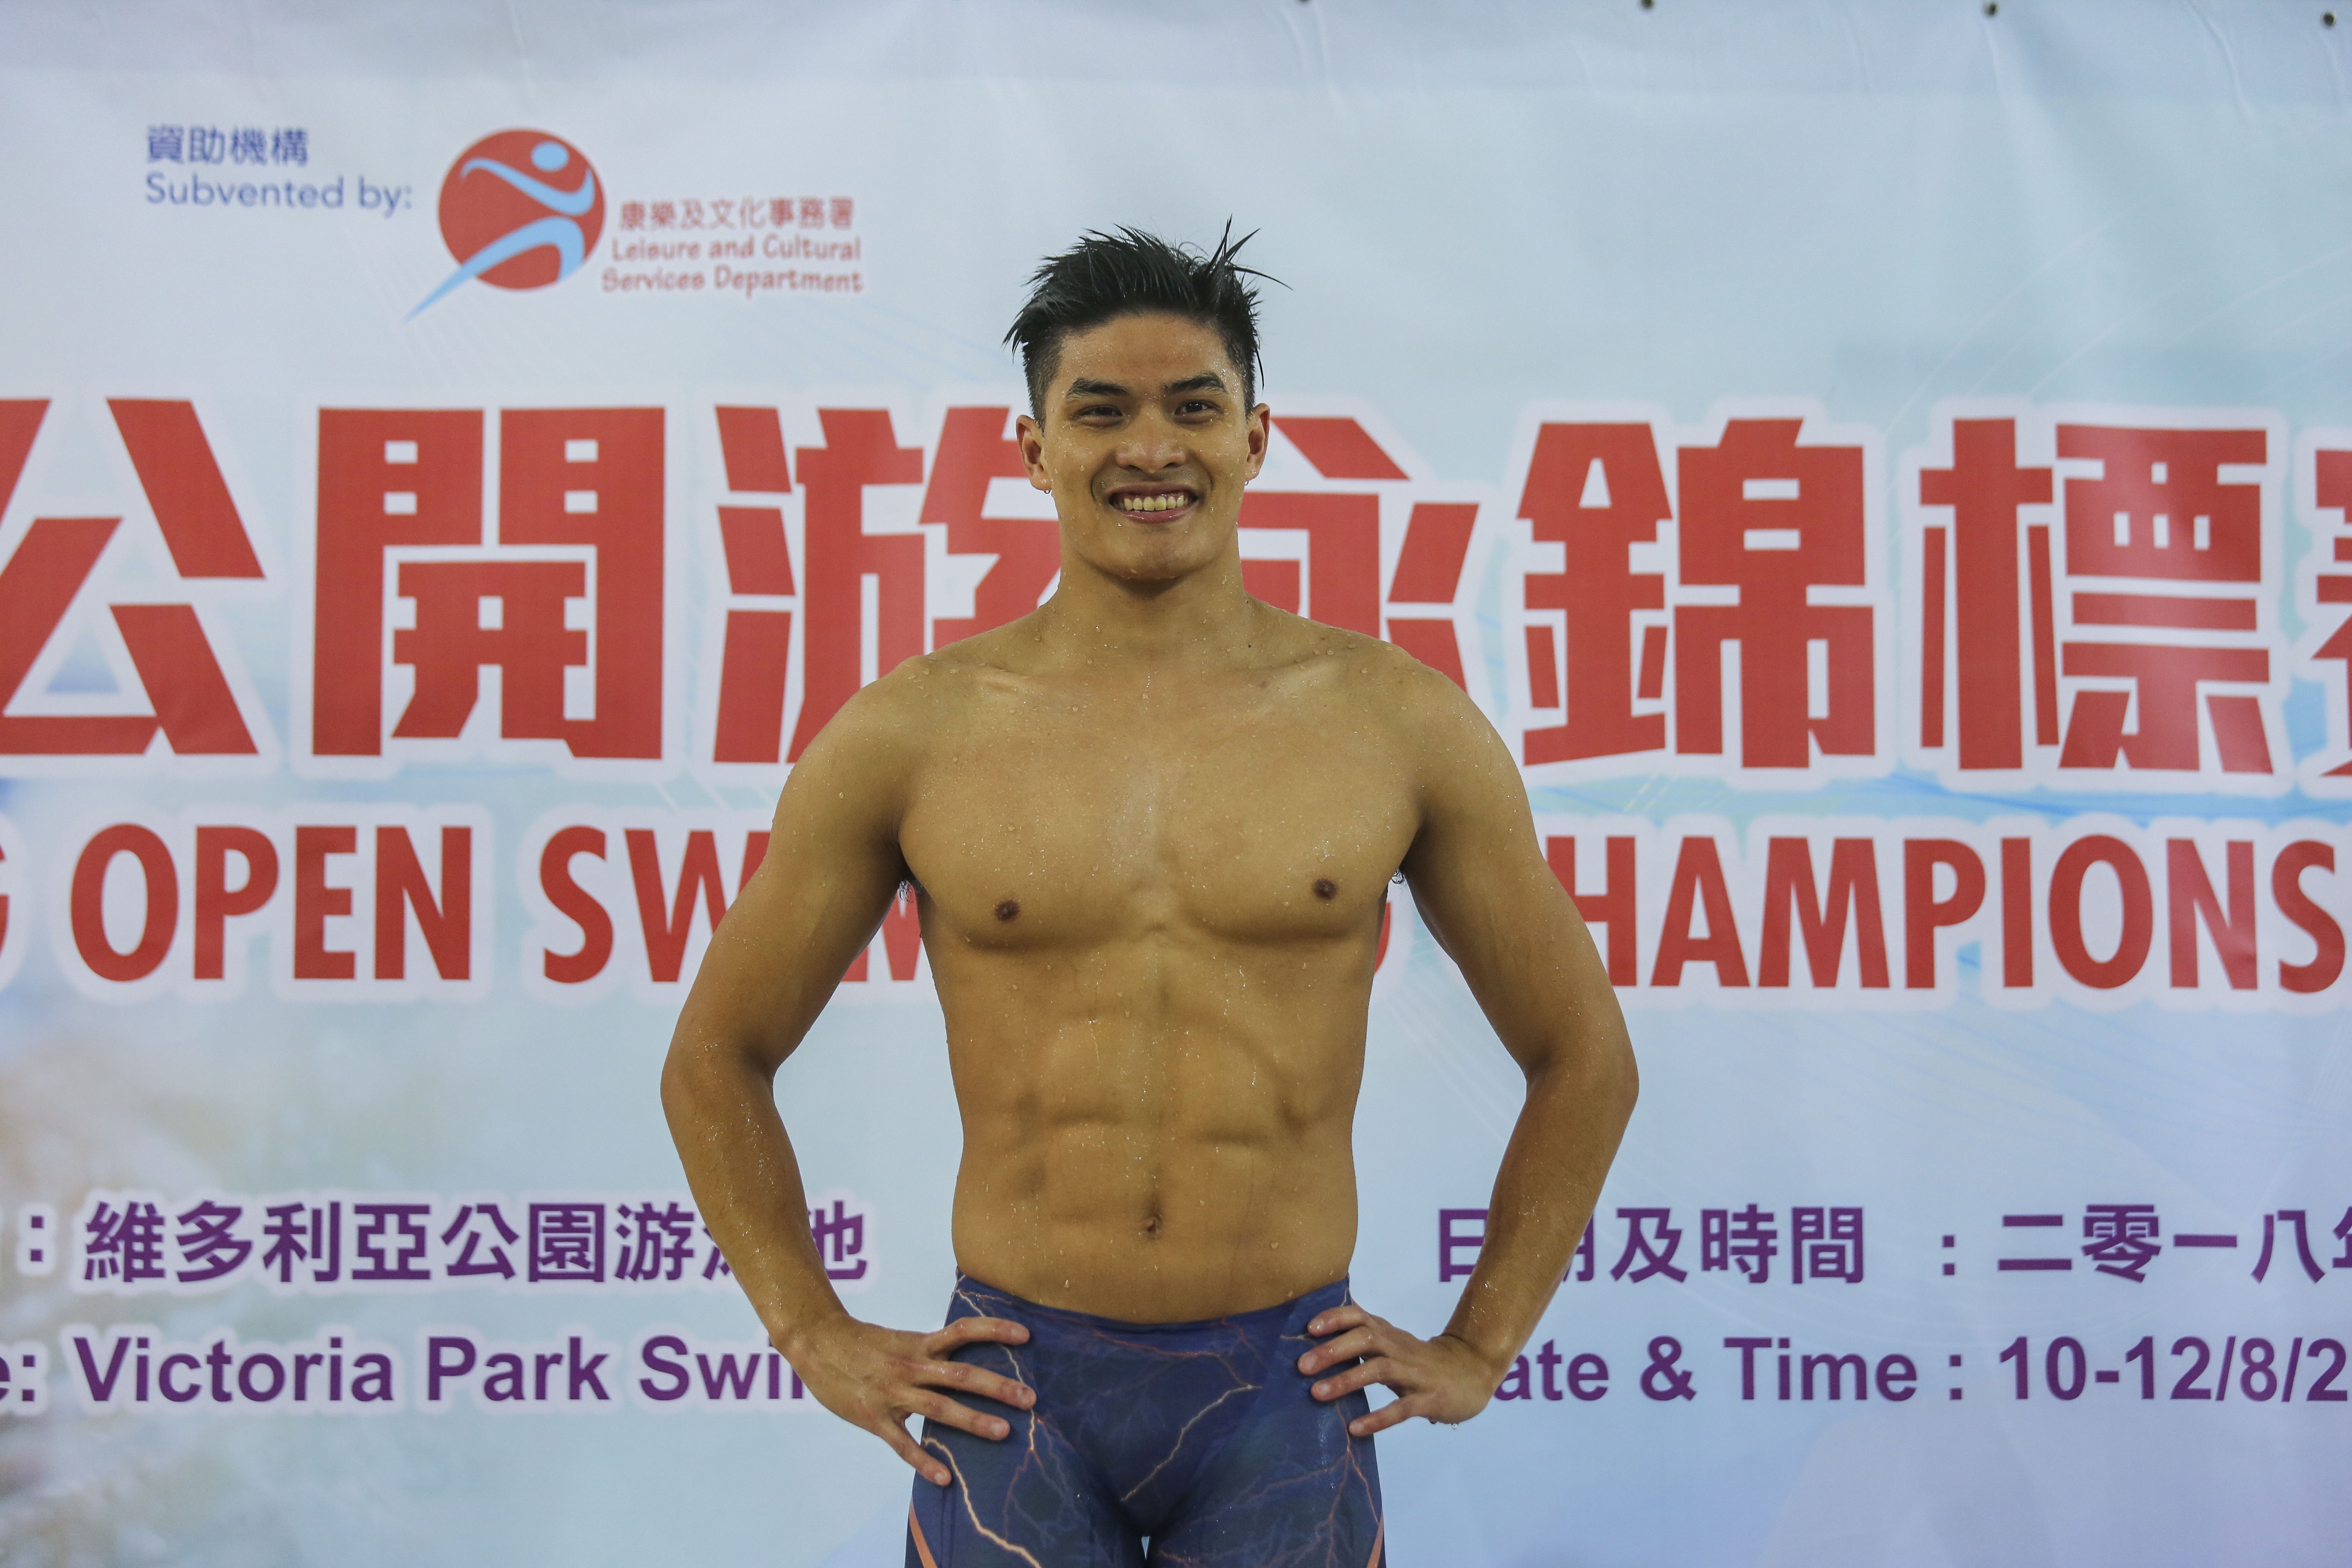 Kenneth To is looking forward to competing at the Asian Games and representing Hong Kong. Photo: Xiaomei Chen